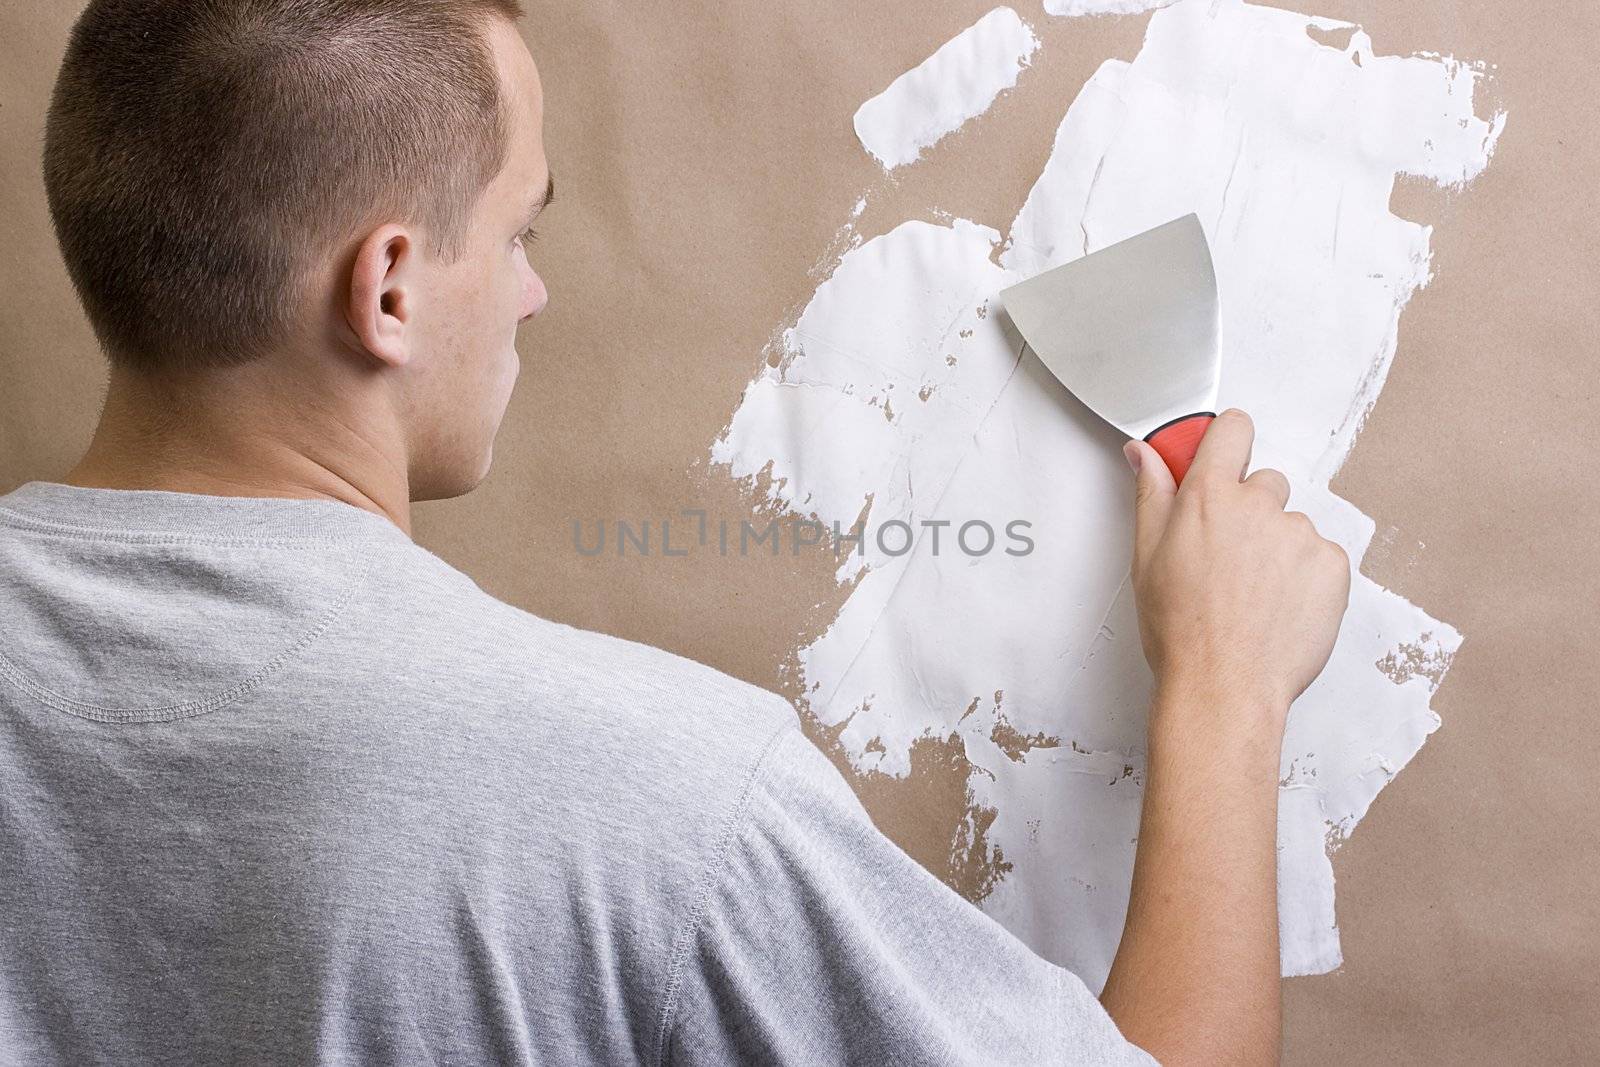 Caucasian man plastering a brown wall with a pallet.